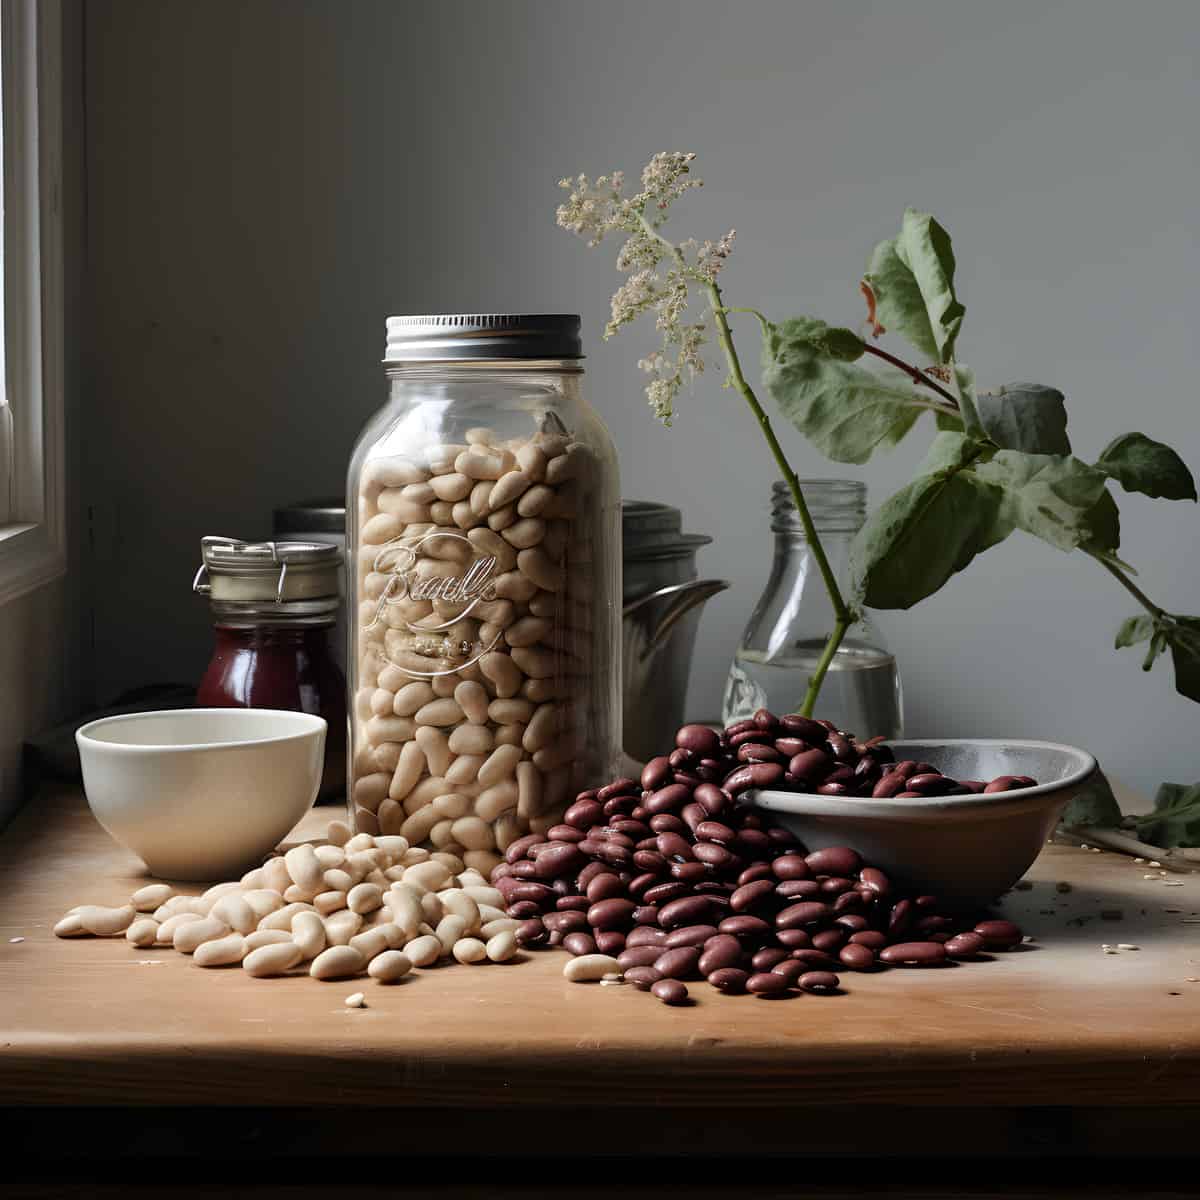 Horse Beans on a kitchen counter